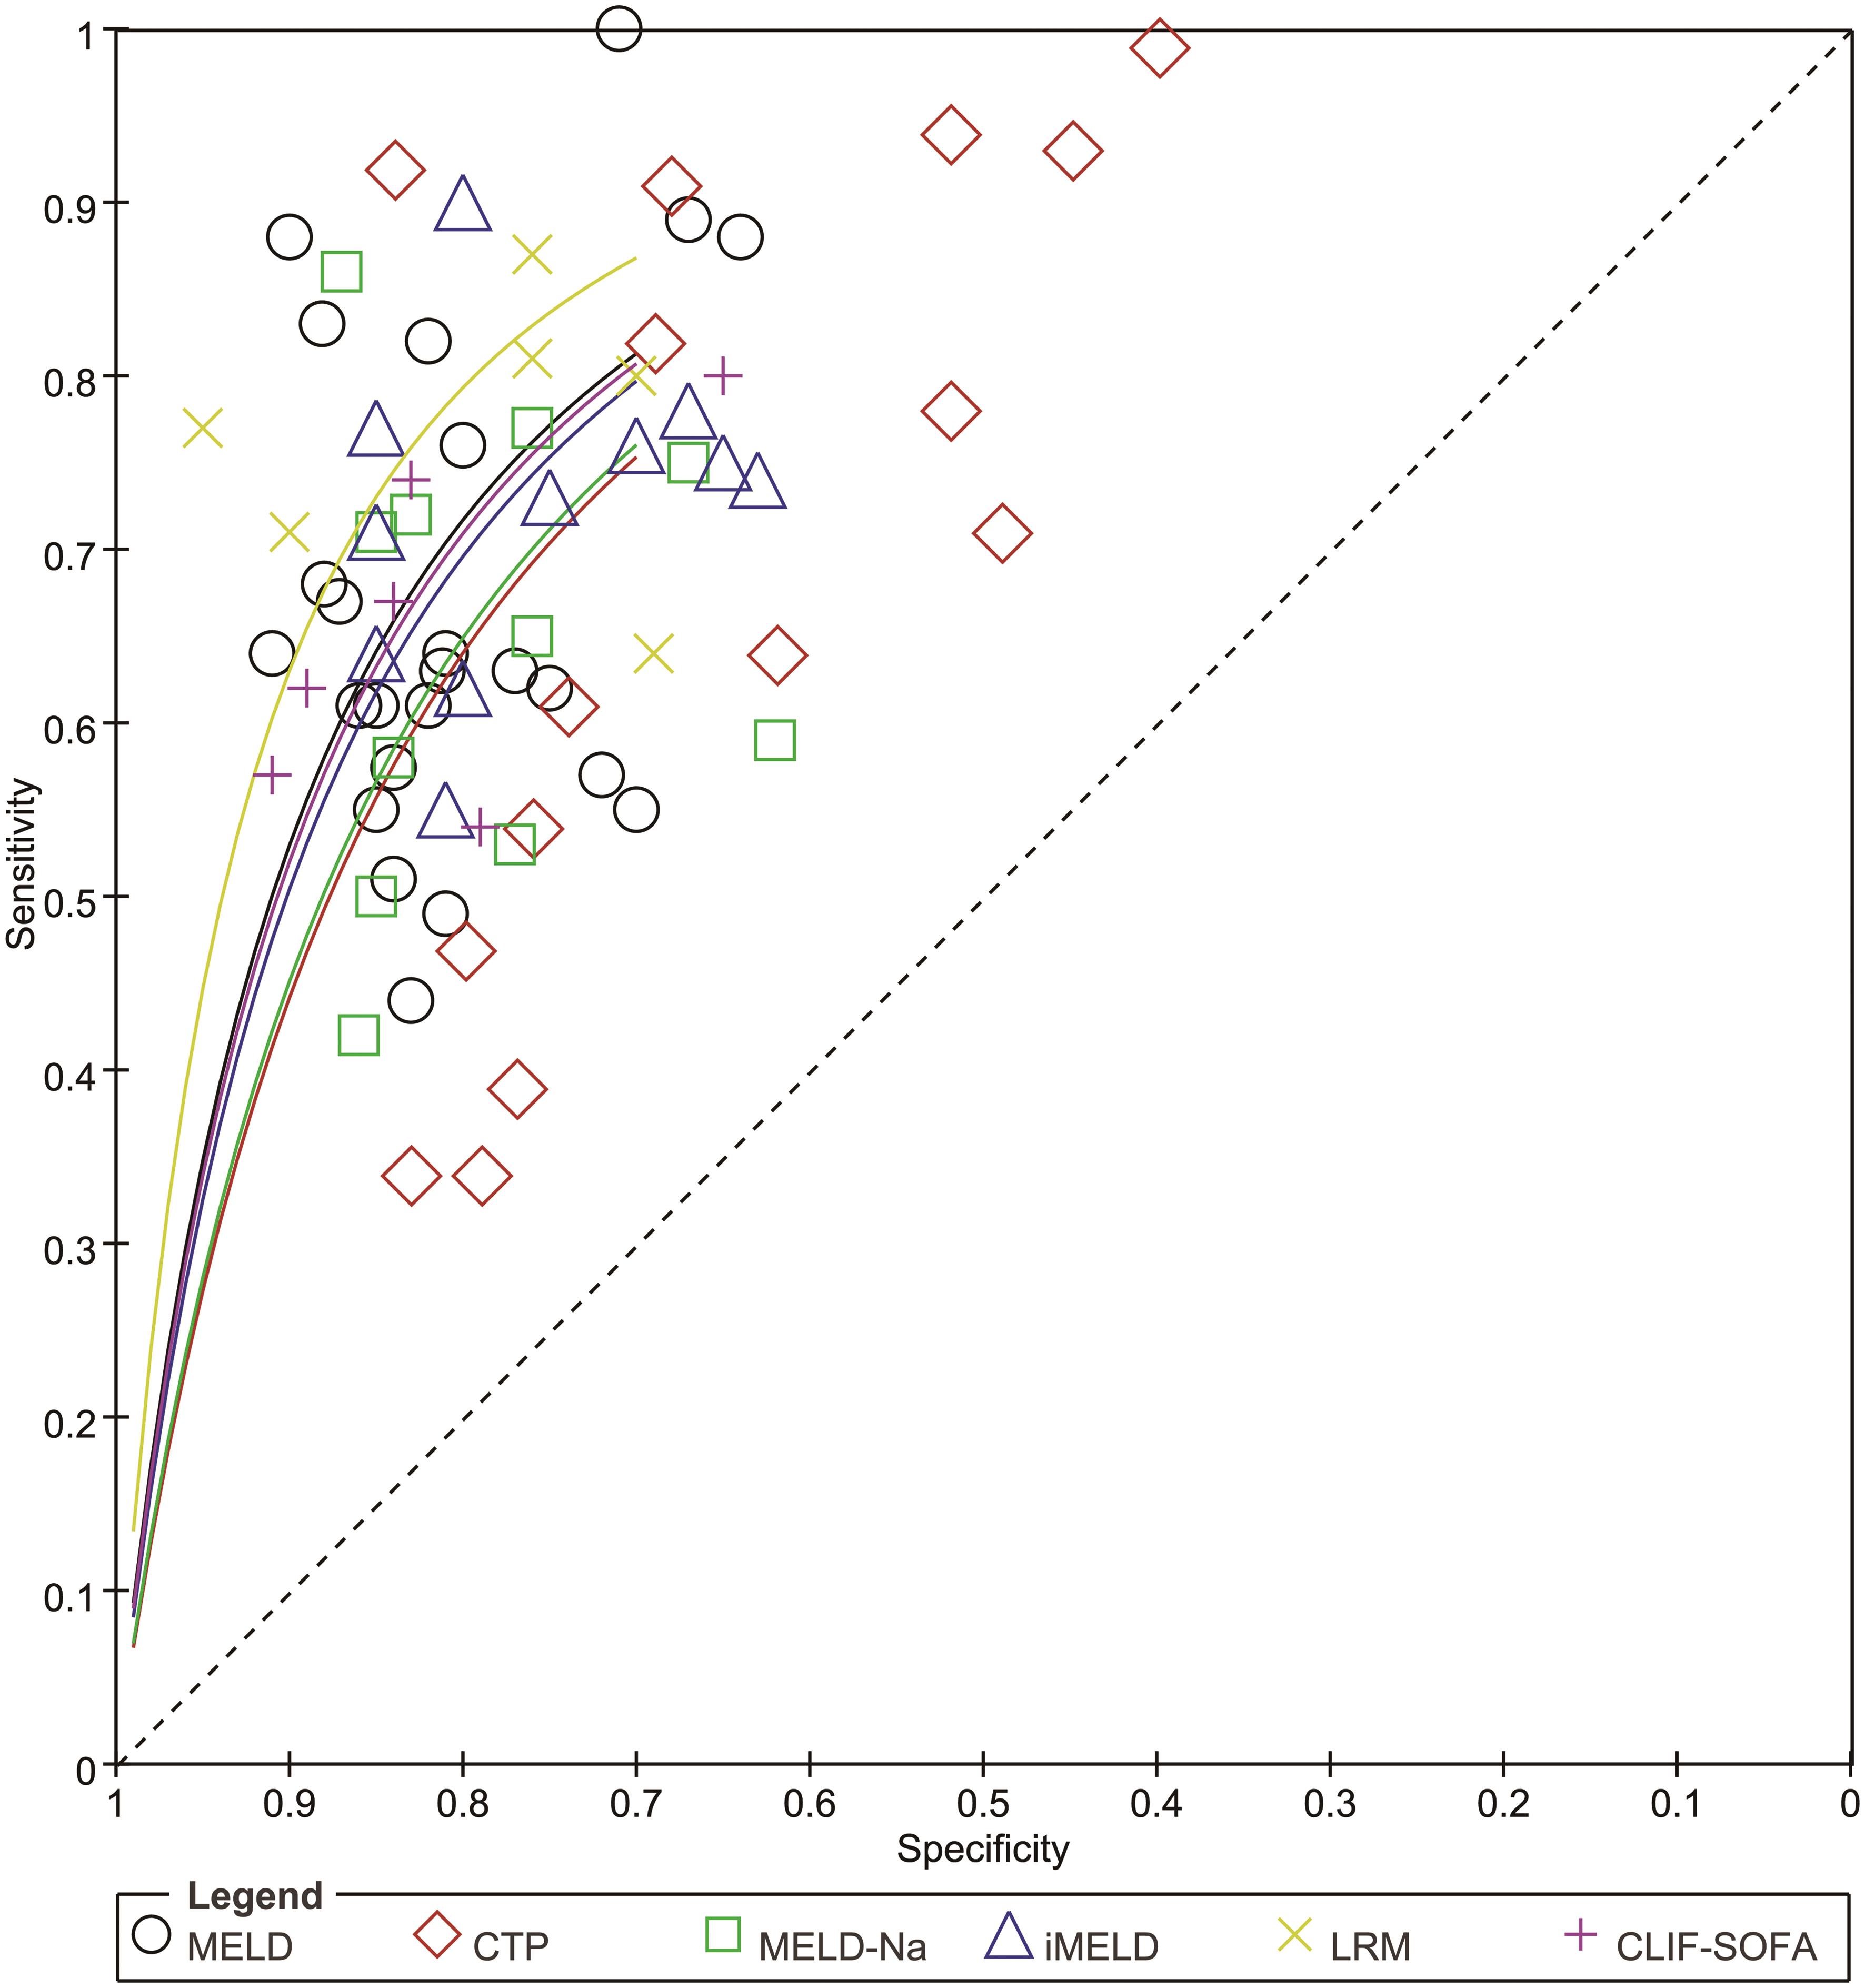 Relationship between MELD score on admission and AUROC values. MELD, model for end-stage liver disease; AUROC, area under the receiver operating characteristic curve.